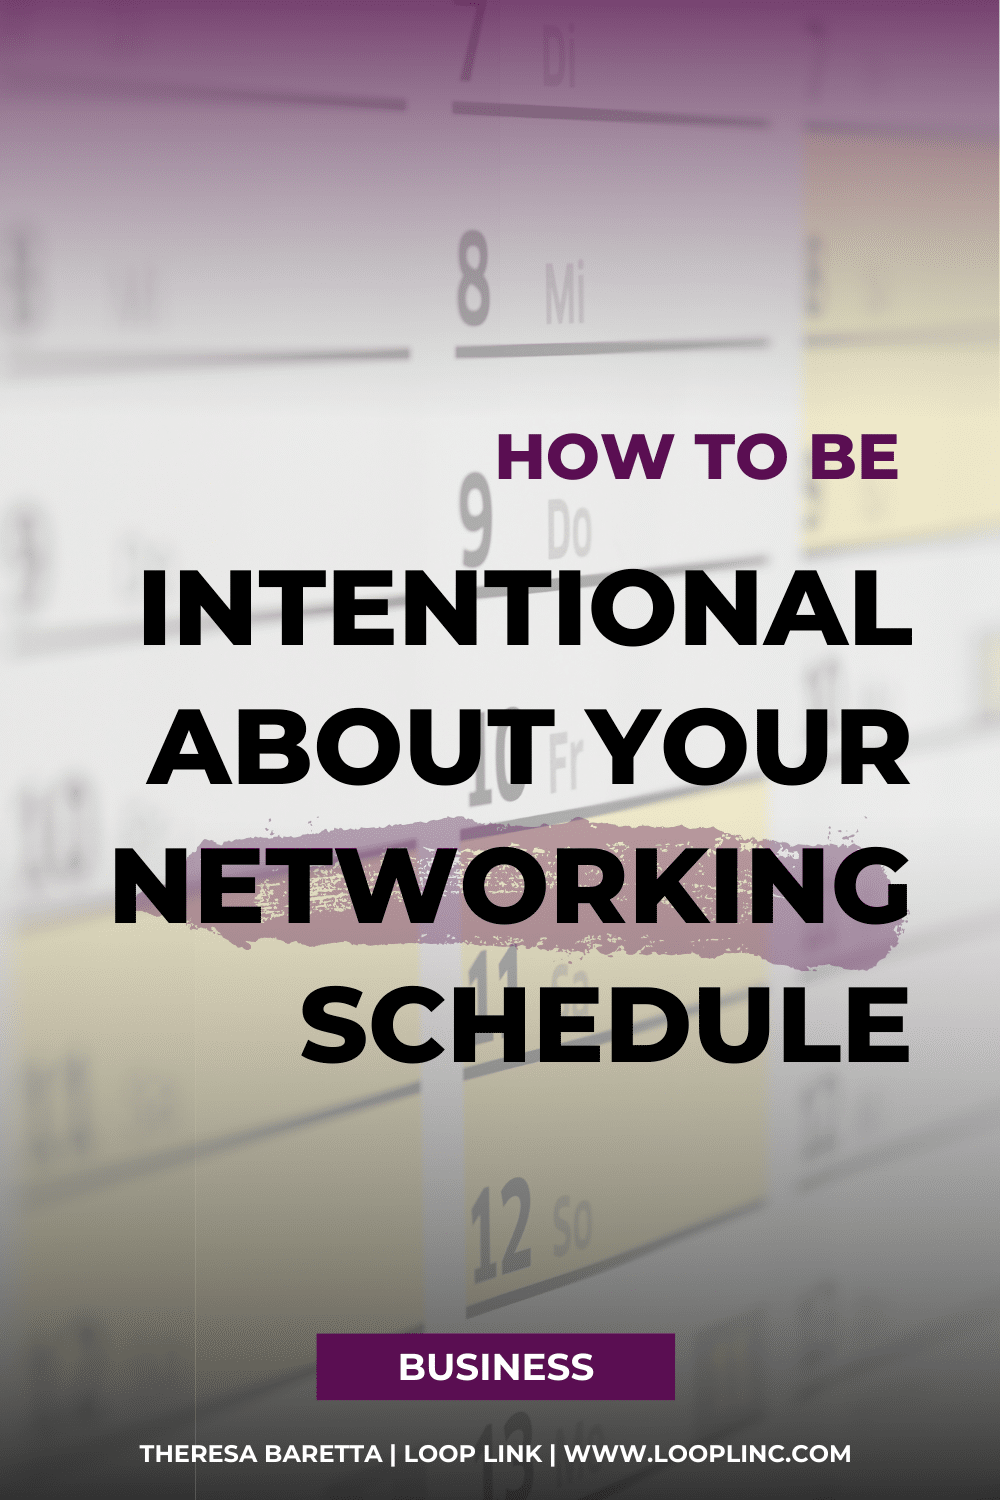 How To Be Intentional About Your Networking Schedule